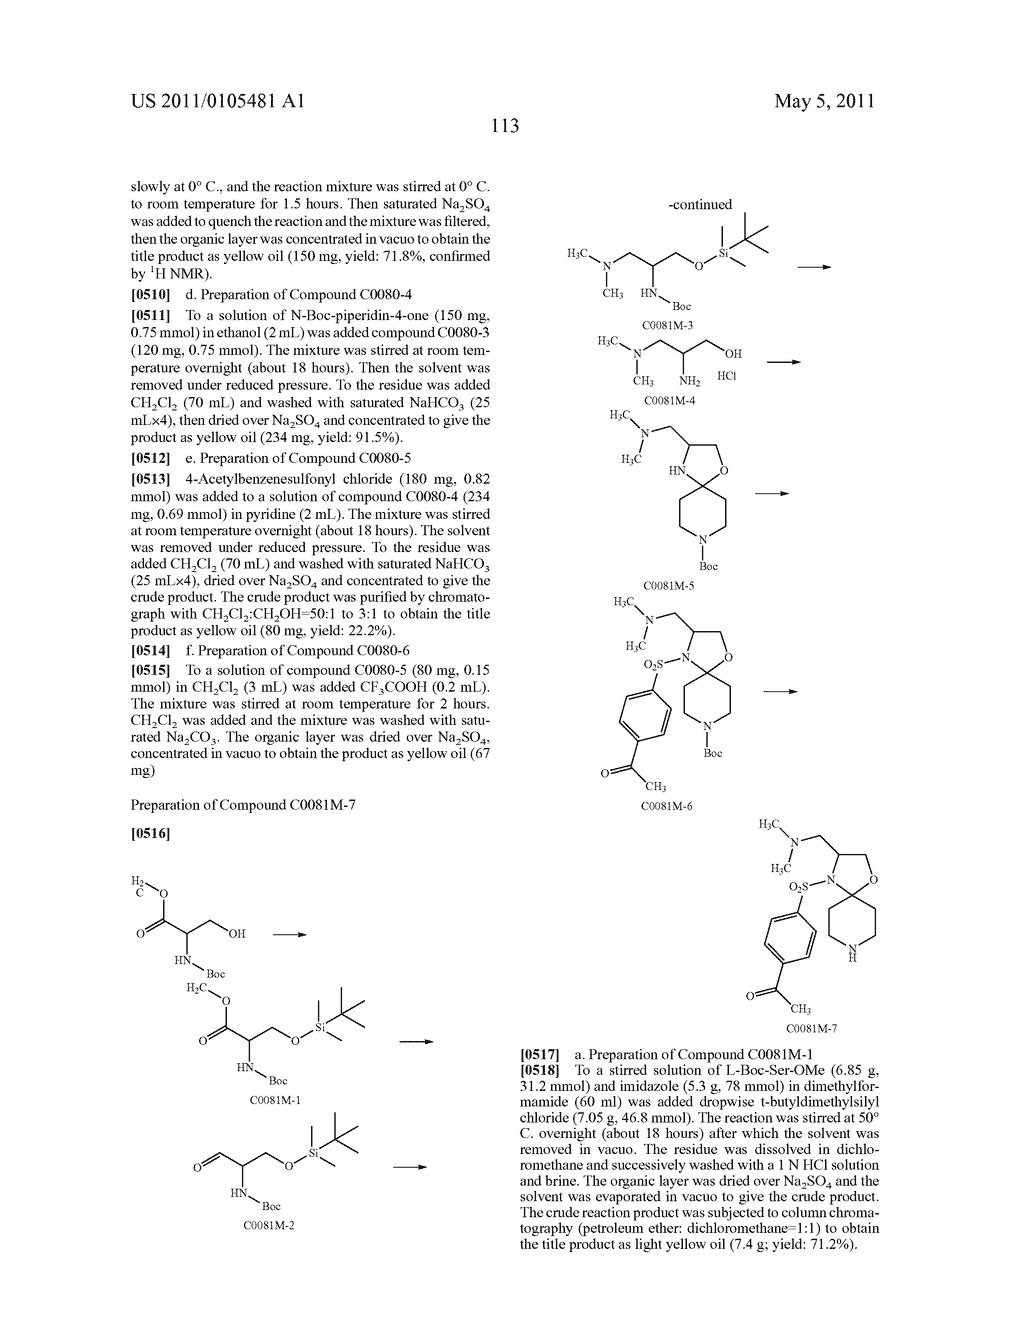 FILAMIN A BINDING ANTI-INFLAMMATORY AND ANALGESIC - diagram, schematic, and image 114